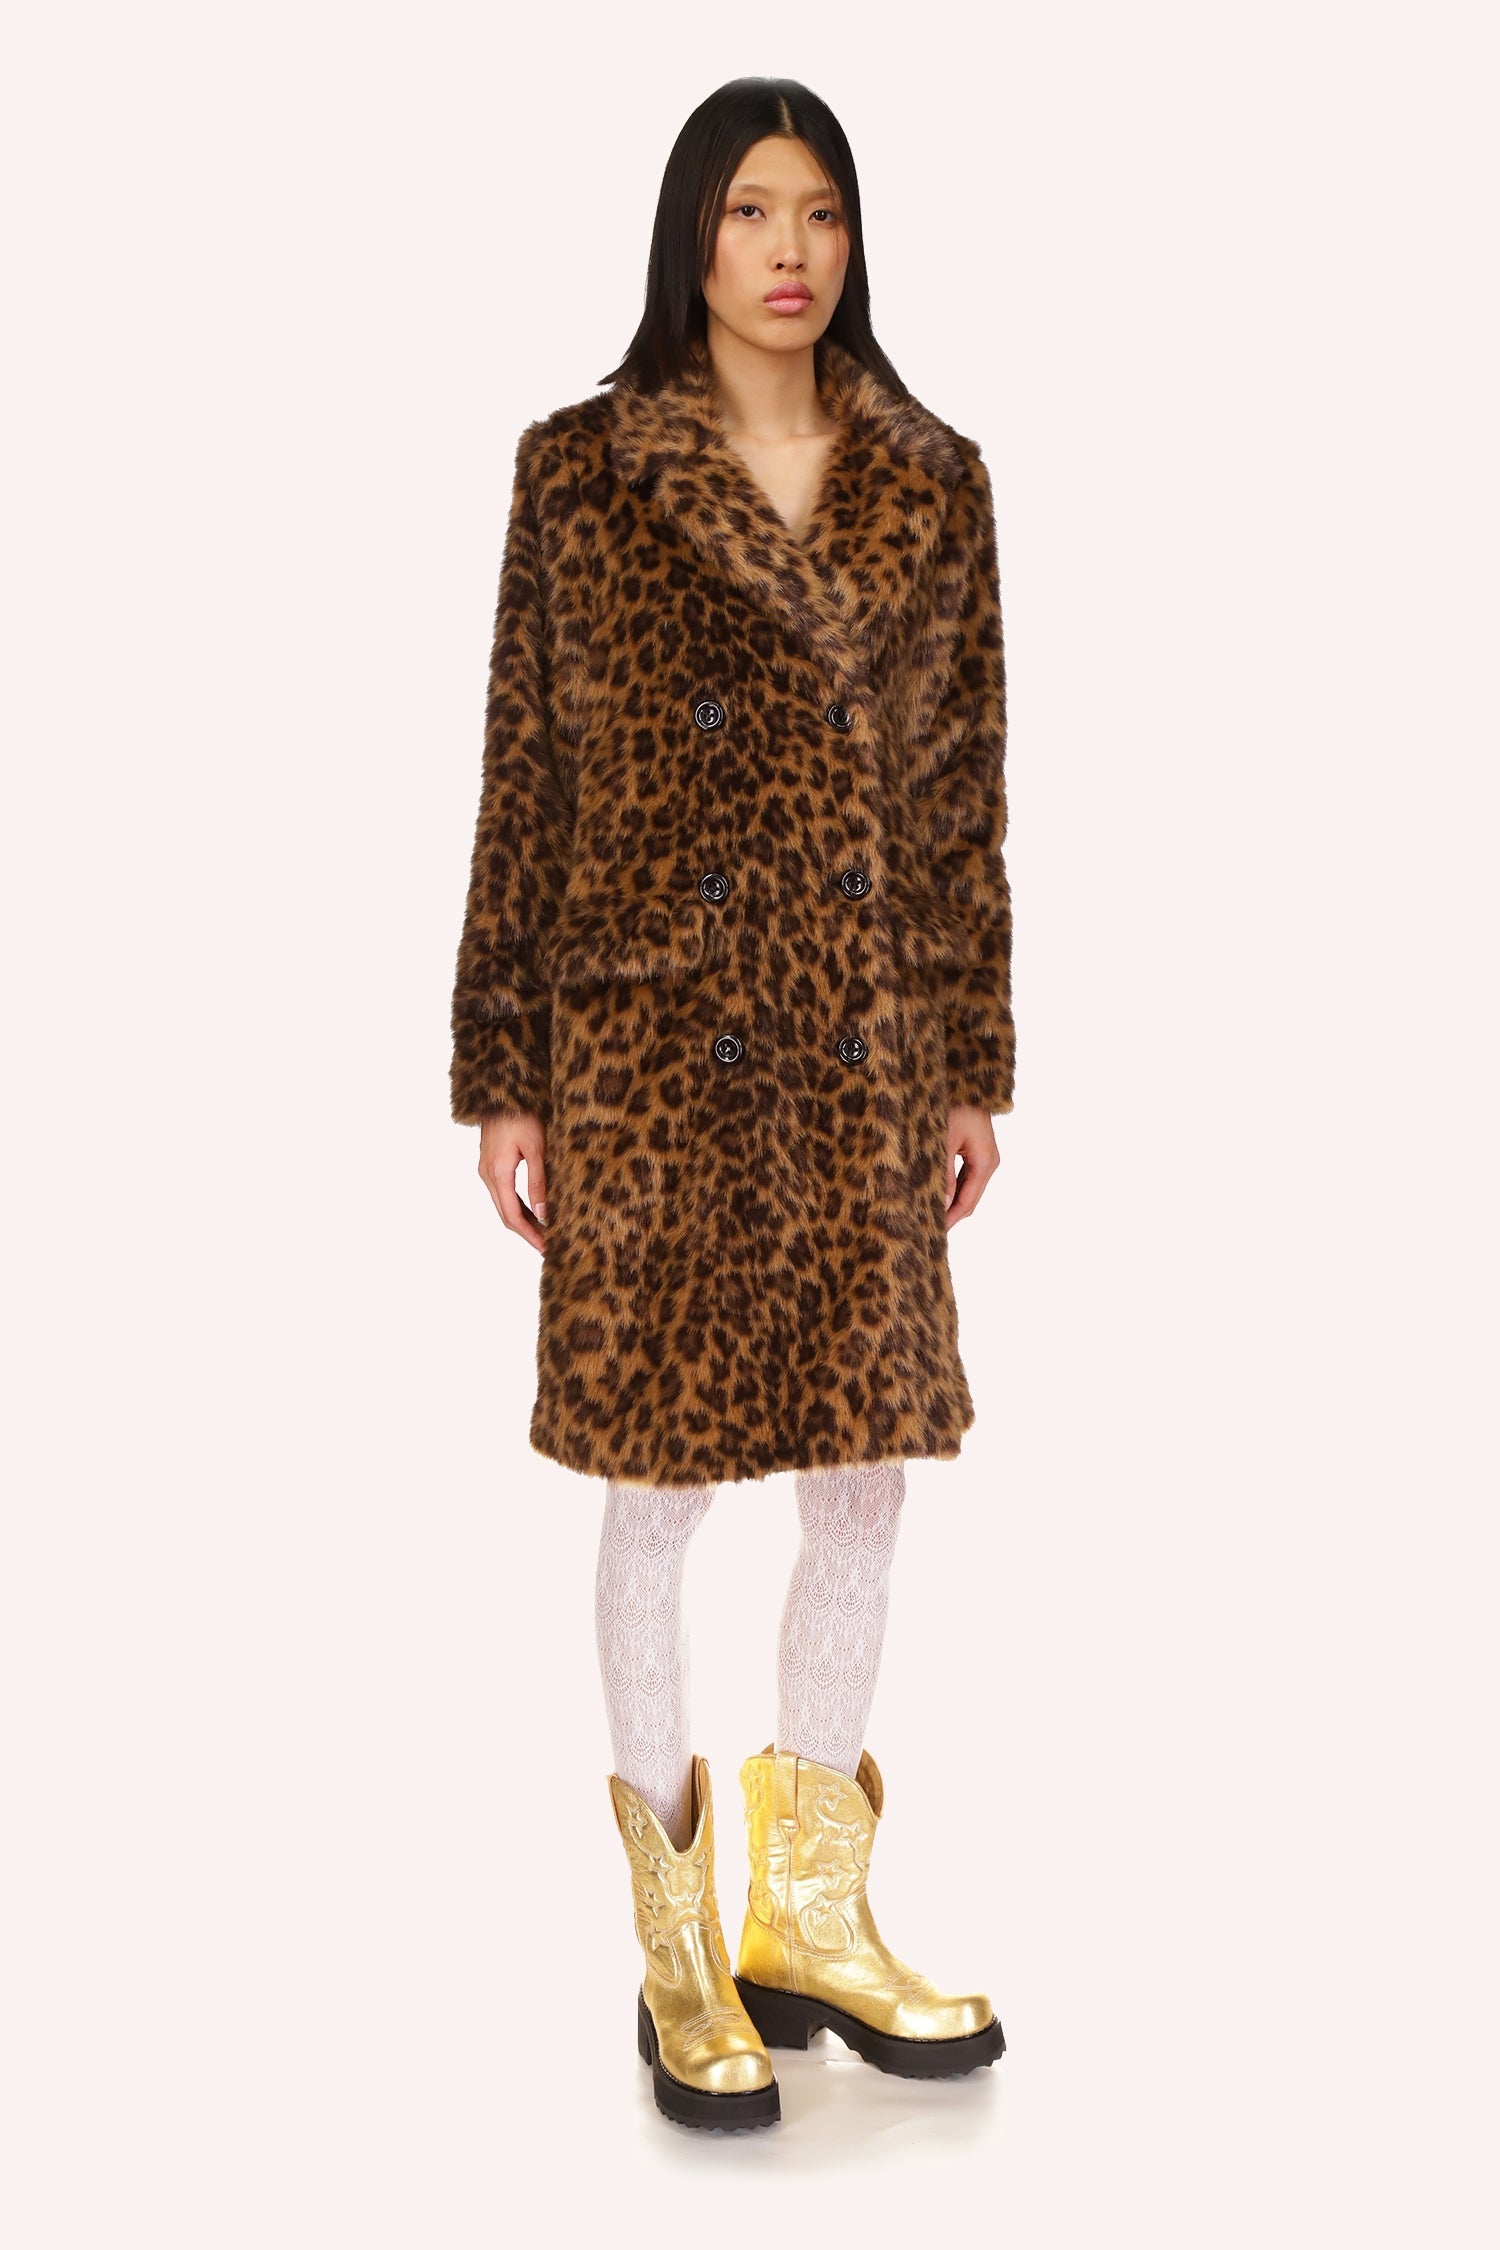 Anna Sui Leopard Double Breasted Coat, knee long, Leopard print, long sleeves, large v-collar, 3 rows of 2 buttons, 2 flapped pockets